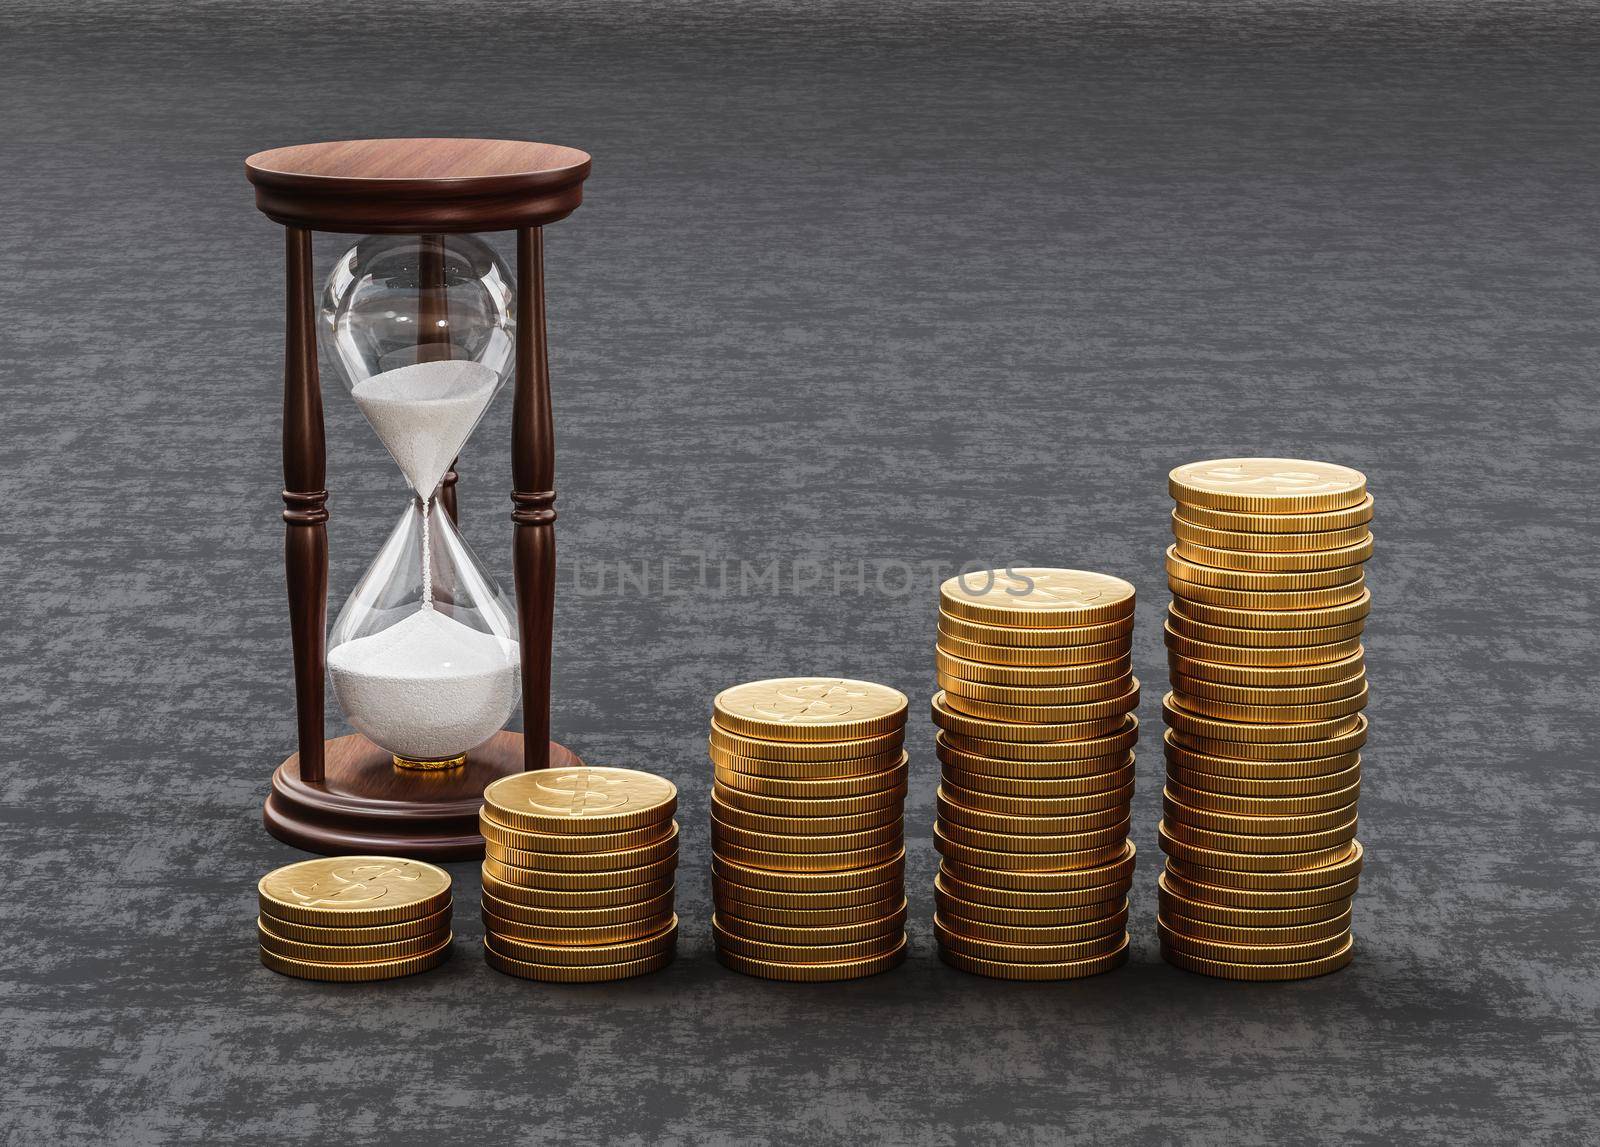 Rising Heaps of Golden Coins on Dark Background with Classic Wooden Hourglass 3D Render Illustration